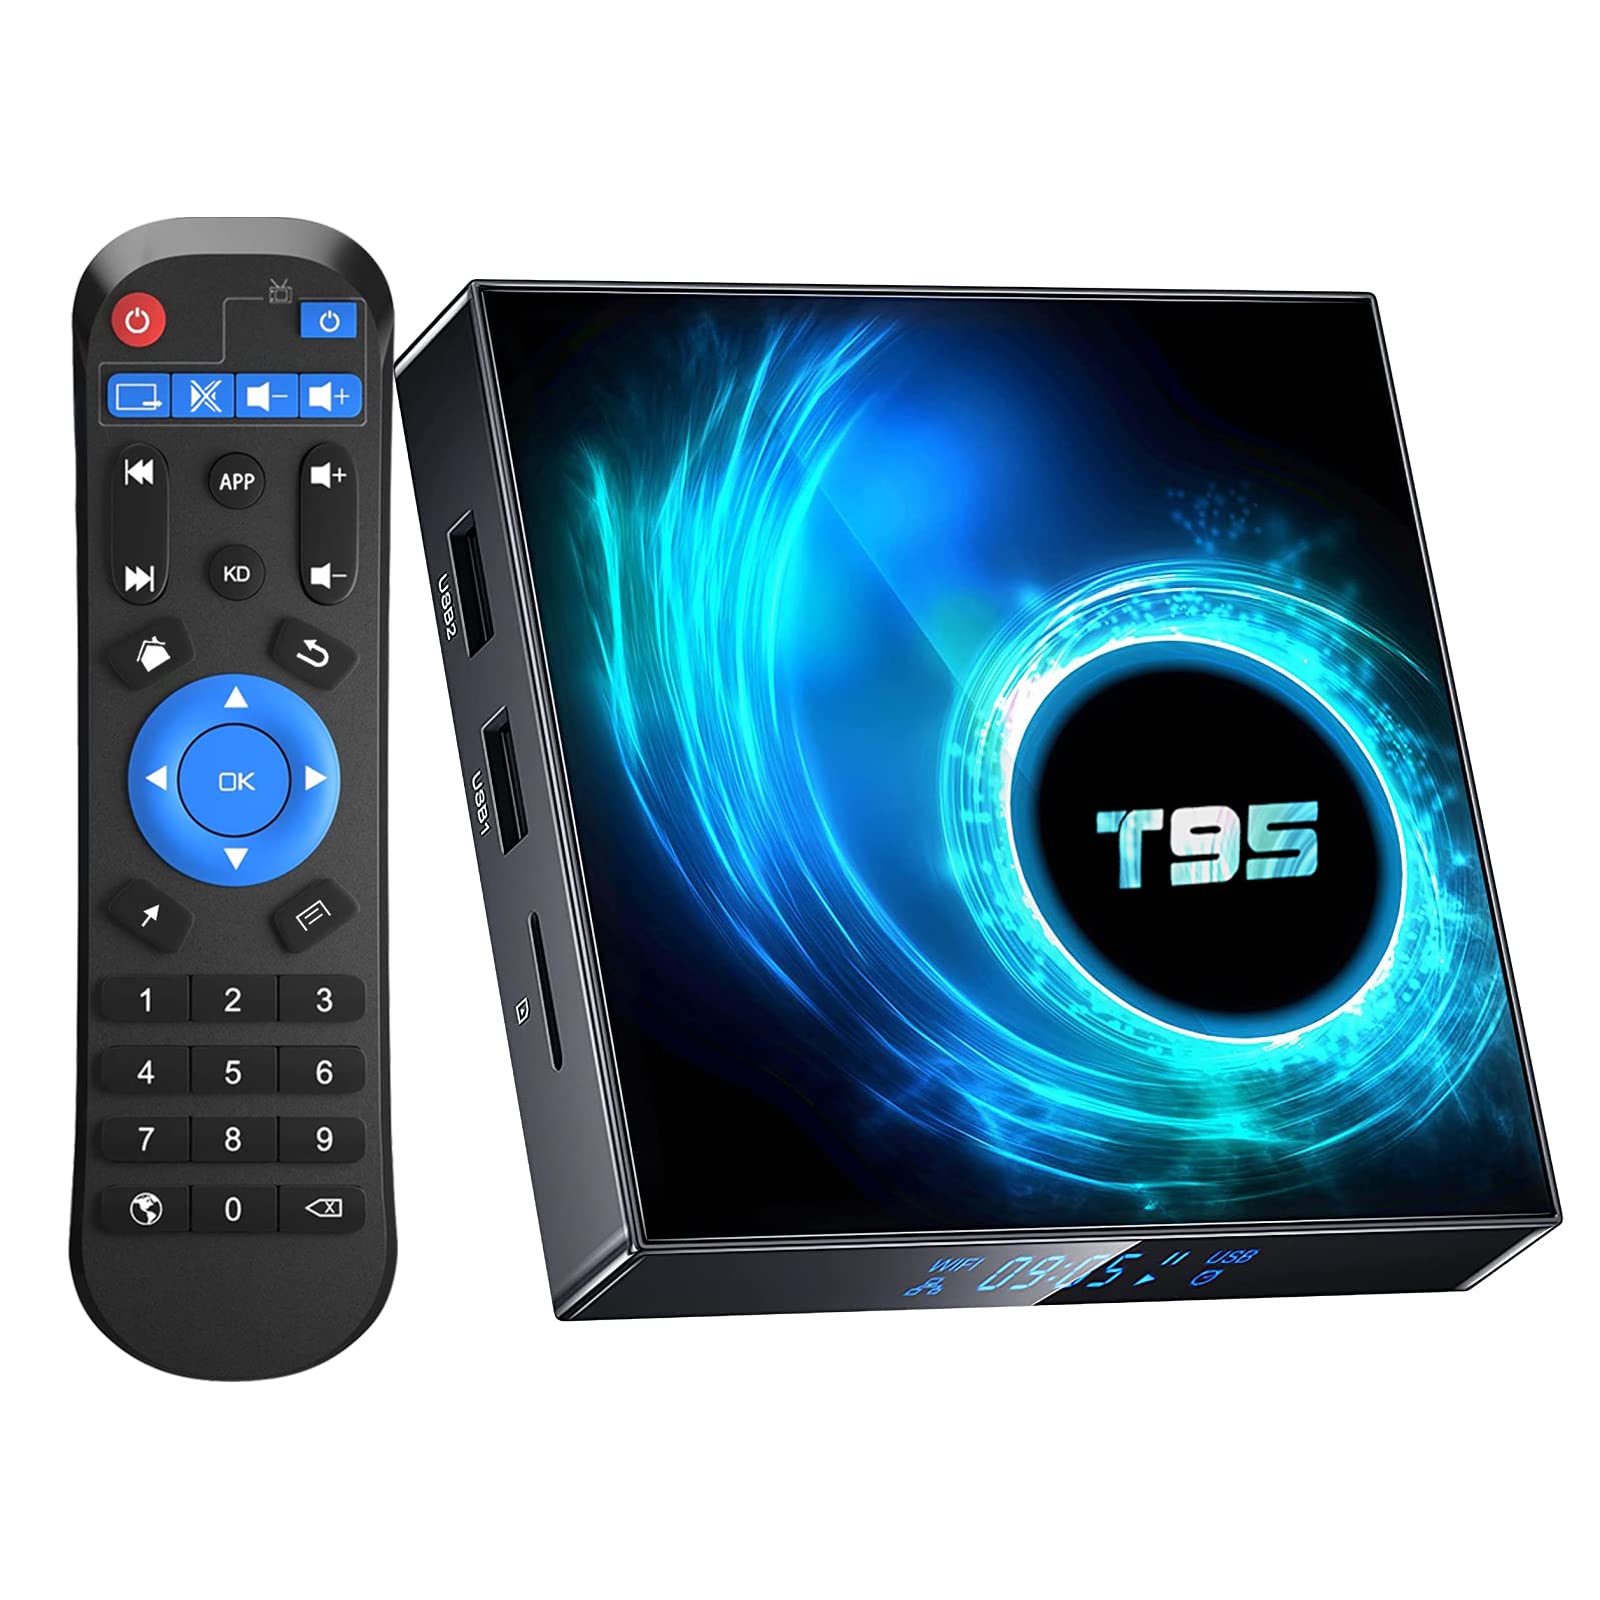 EASYTONE Android TV Box 10.0, T95 Android TV Box 4GB RAM 64GB ROM H616 Quad-Core CPU Smart TV Box Supports 2.4/5G WiFi Ethernet BT4.0 4K 6K Ultra HD Output H.265 Decoding Android Box TV